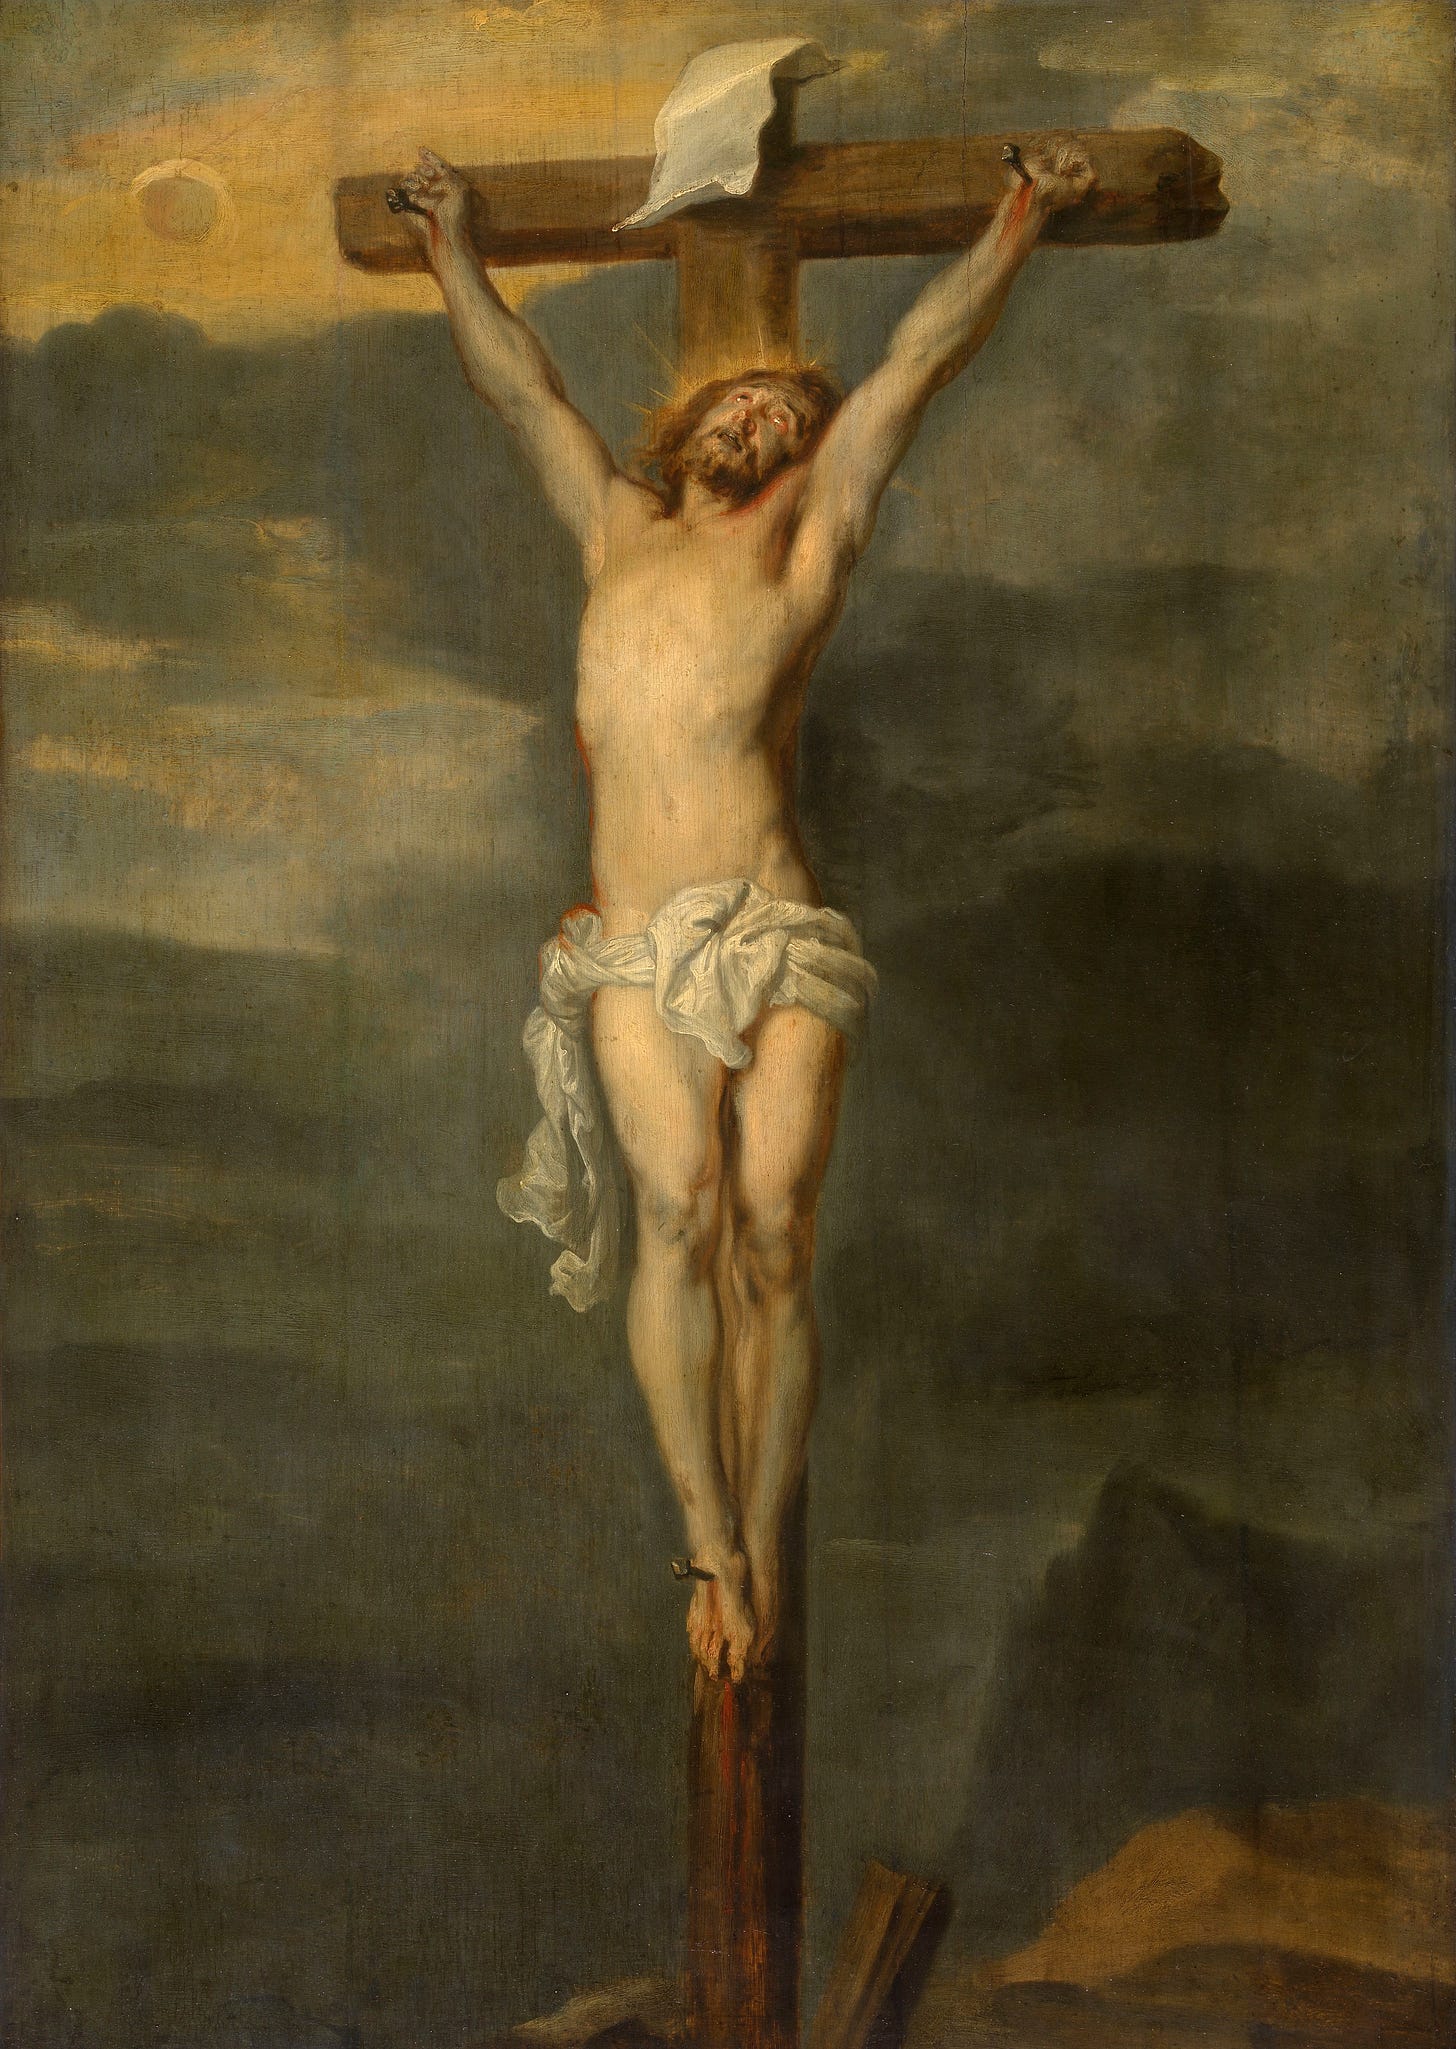 Christ on the Cross by Anthony van Dyck (Flemish, 1599-1641)